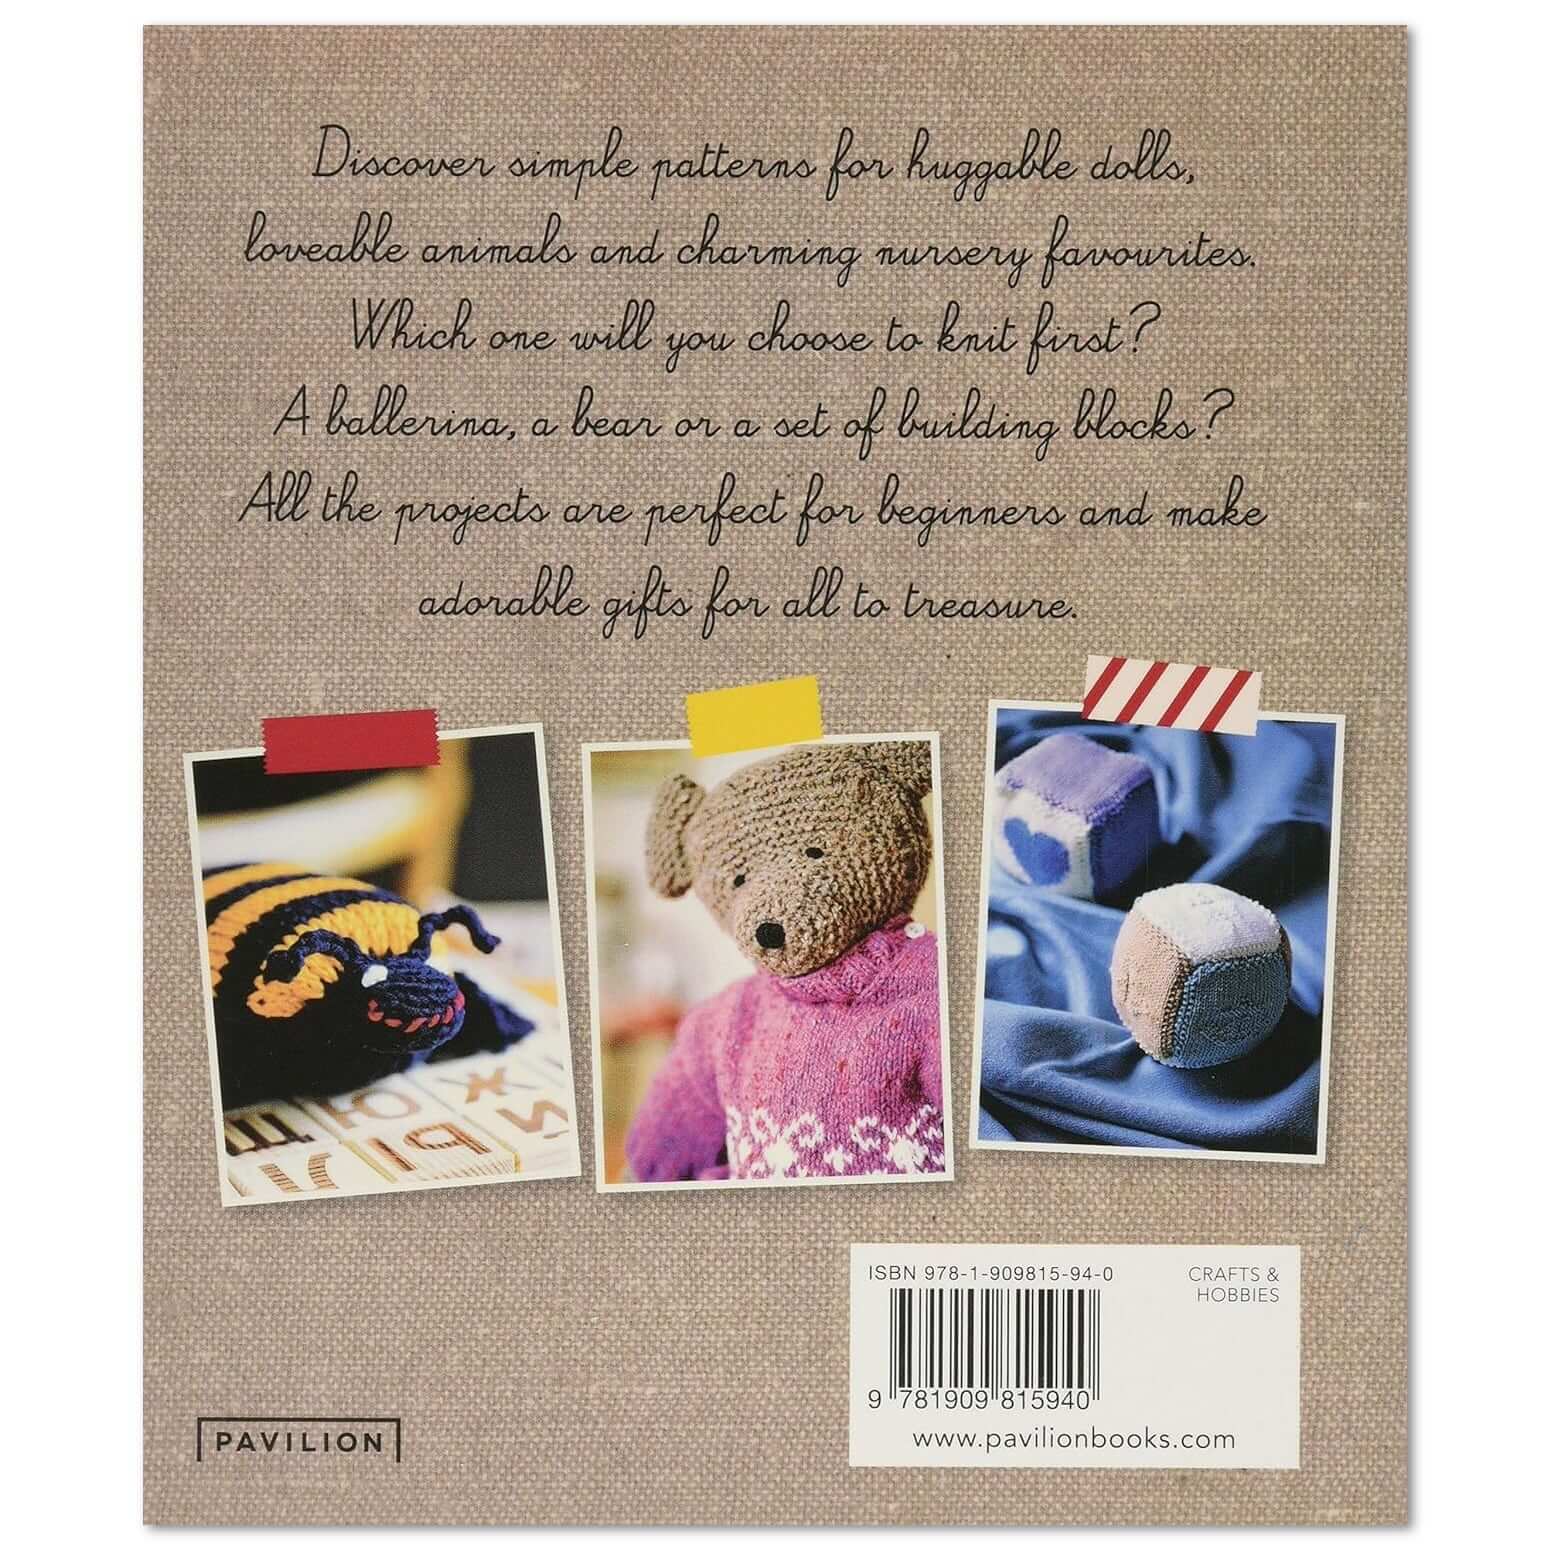 Knit Toys Easy Toys To Knit: Cute & Cuddly Dolls, Animals & Toys Pattern Book